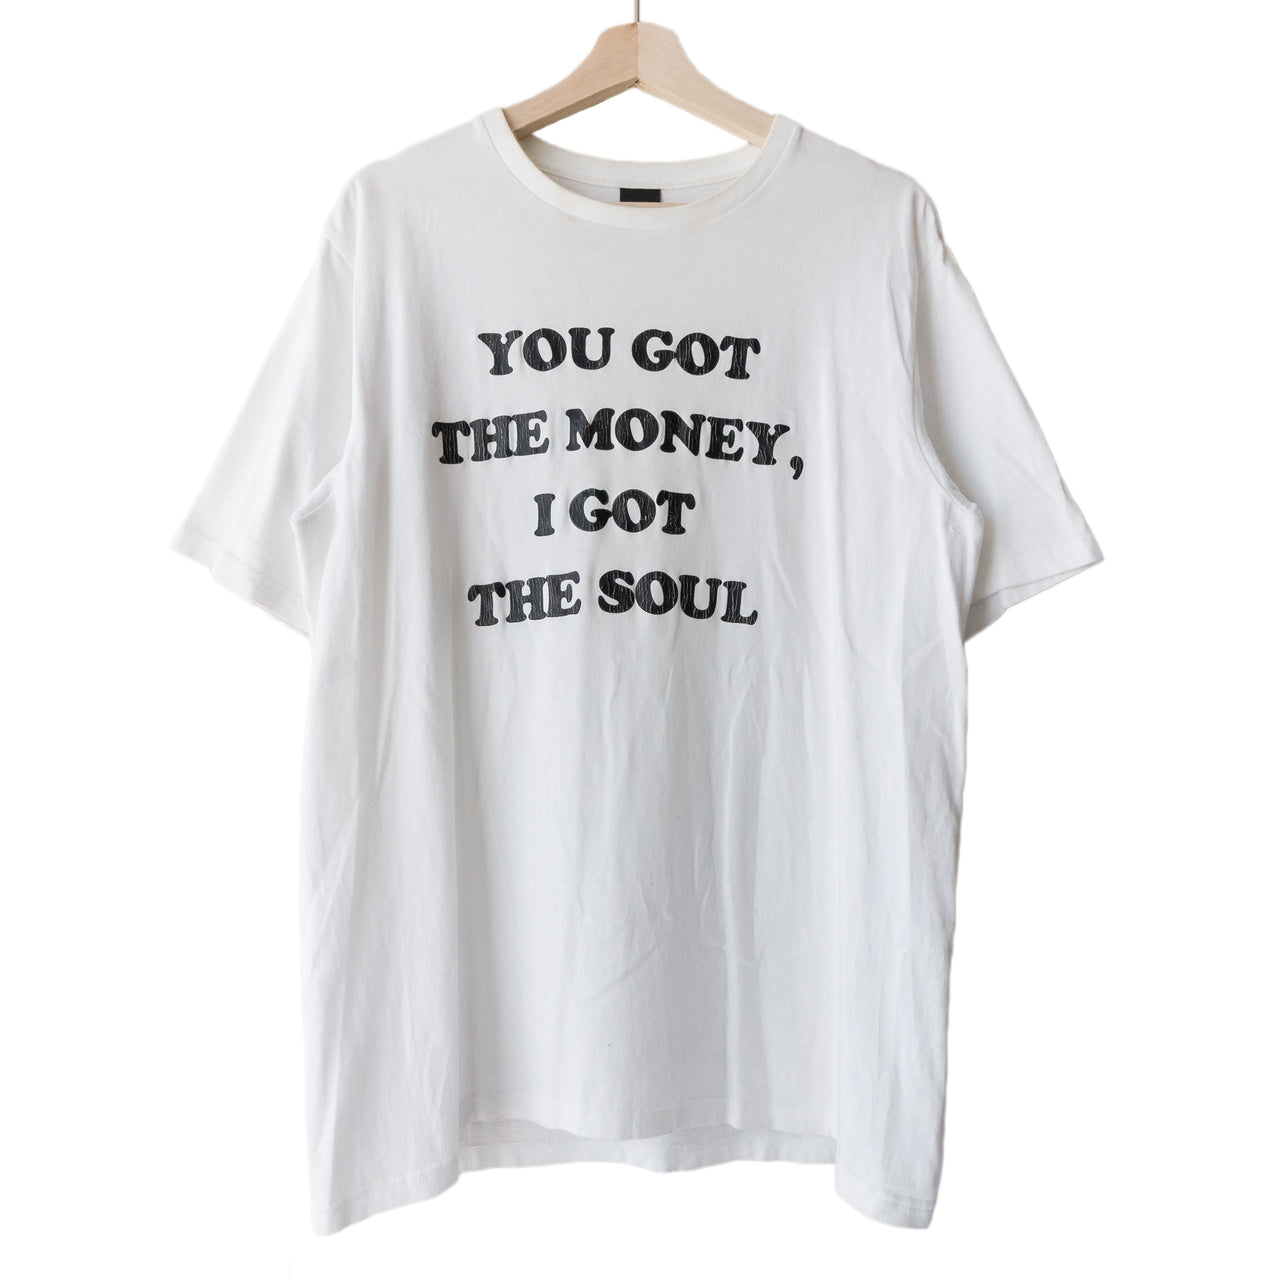 Number (N)ine "You Got the Money, I Got the Soul" Tee